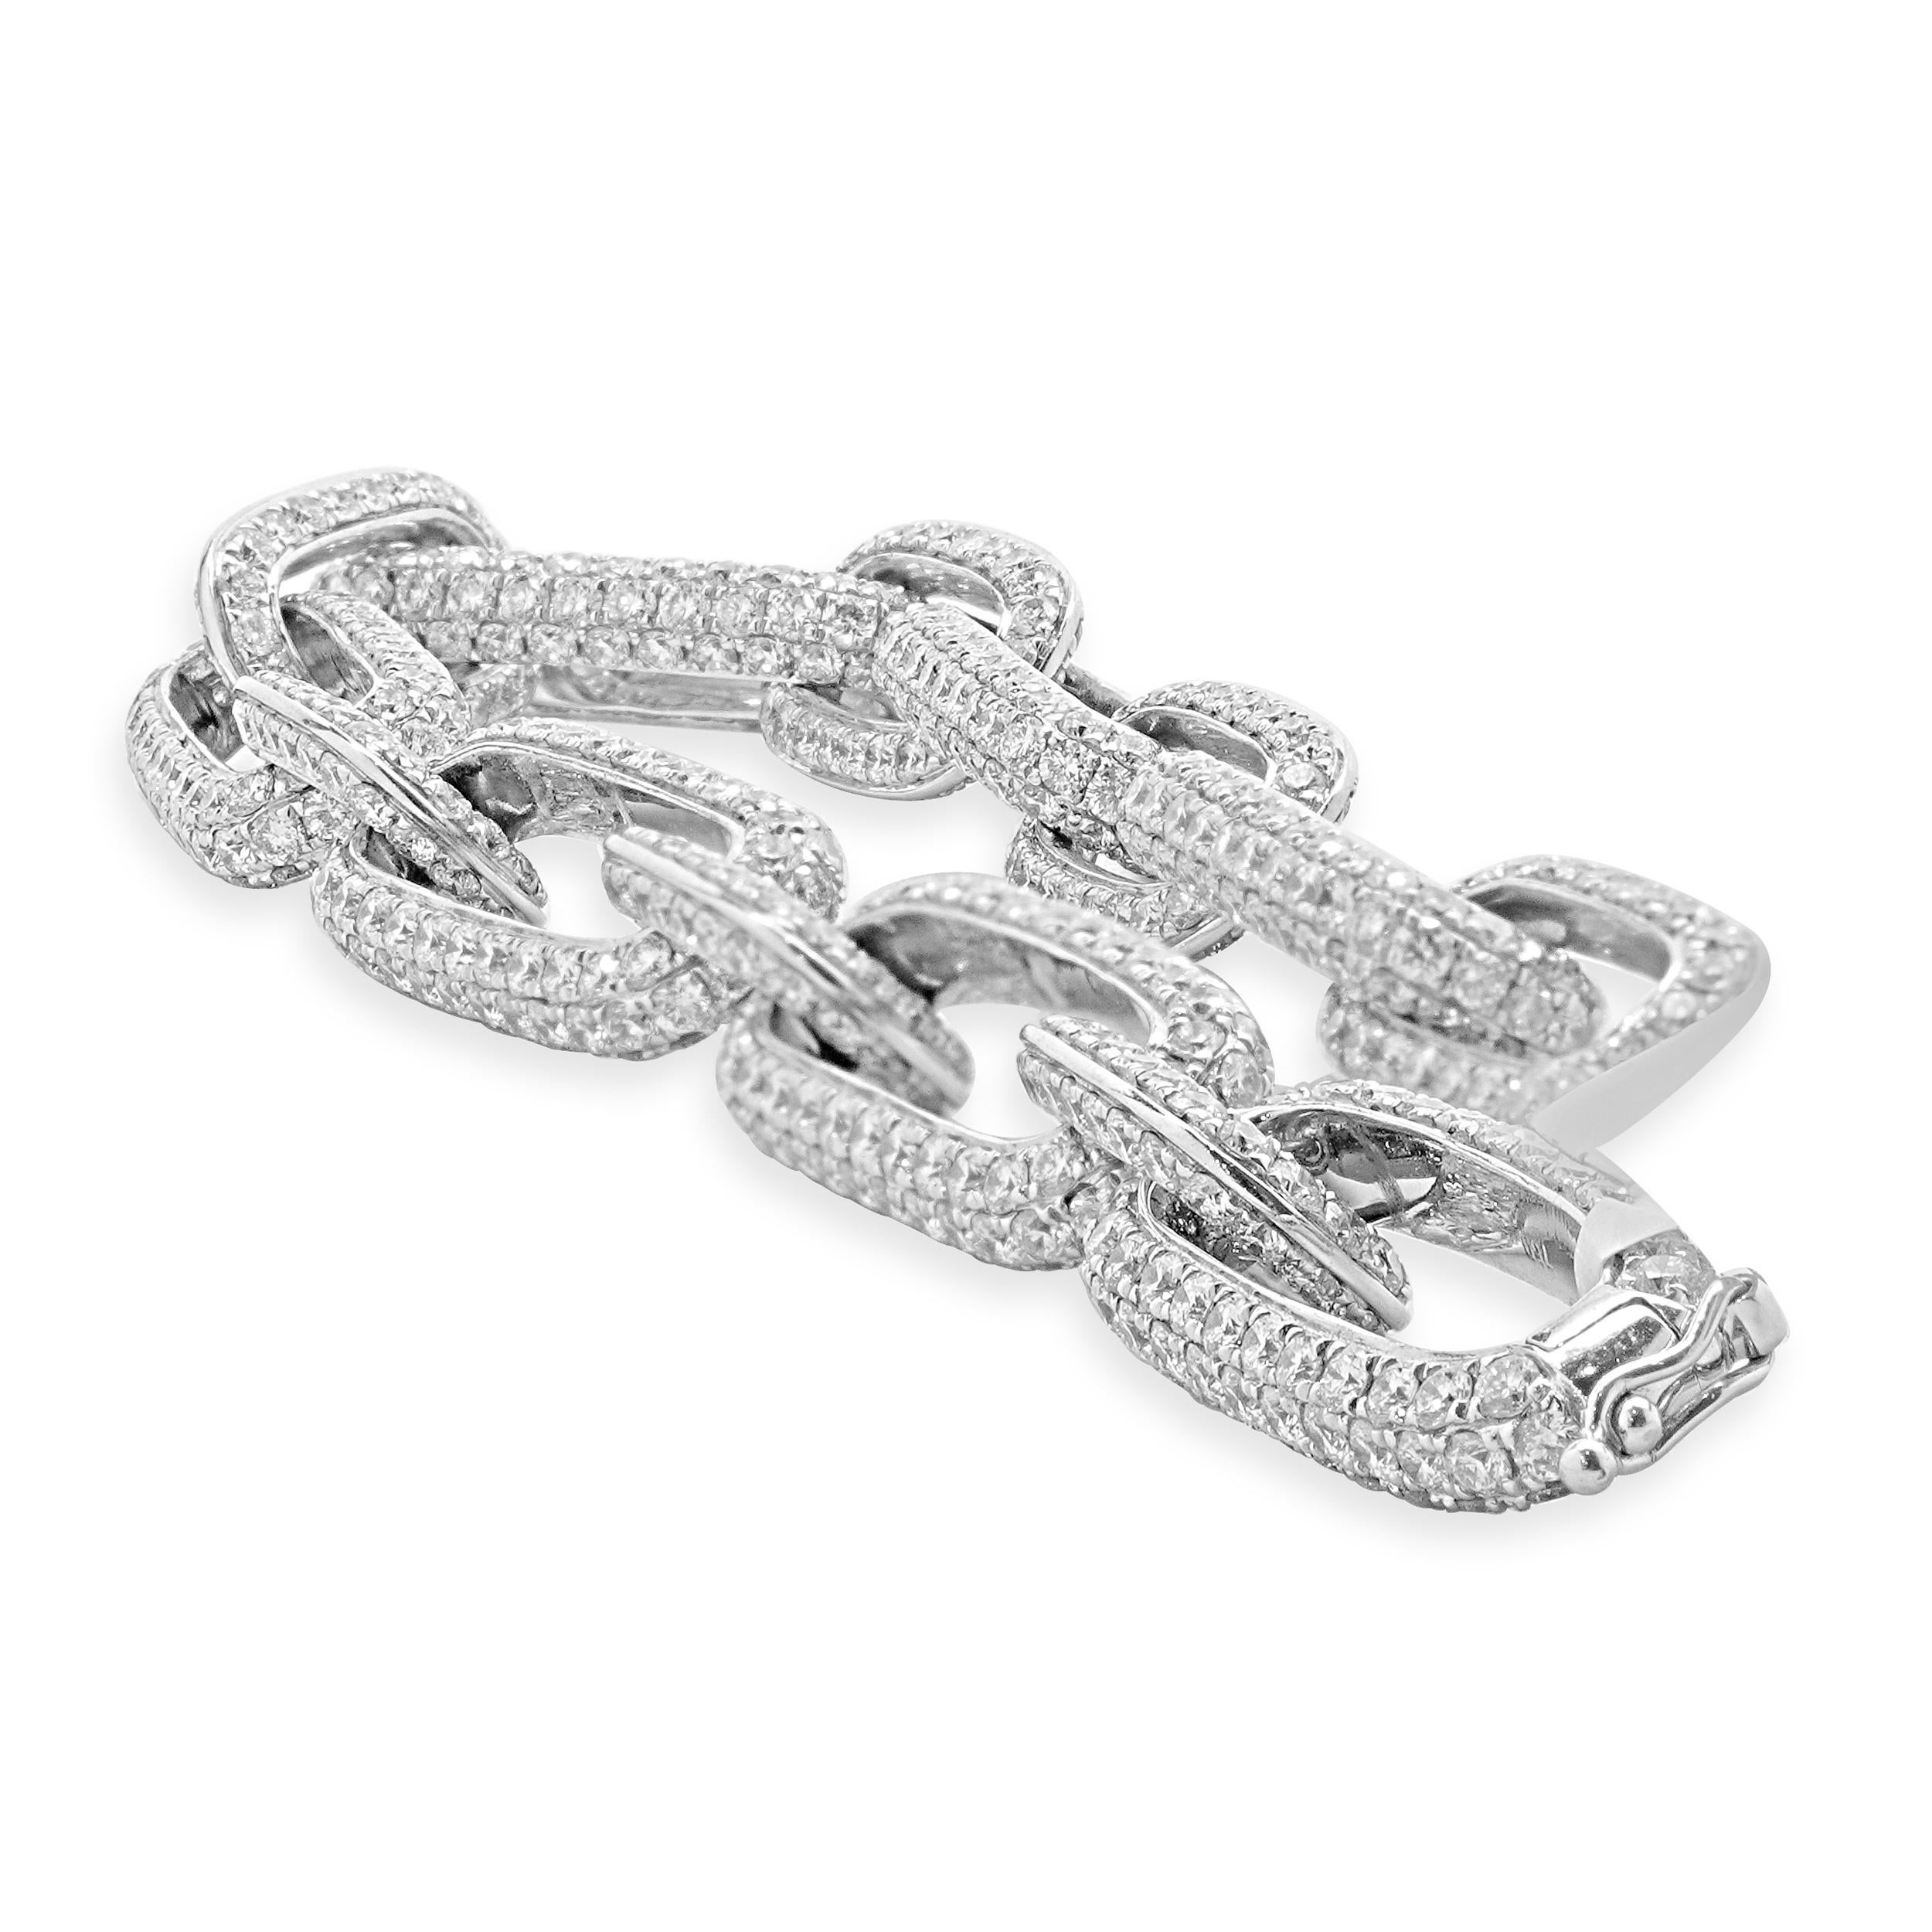 Designer: custom
Material: 18K White gold
Diamond: 897 round brilliant cut = 17.60cttw
Color: H
Clarity: SI1-2
Dimensions: bracelet will fit up to a 8-inch wrist
Weight: 27.11 grams